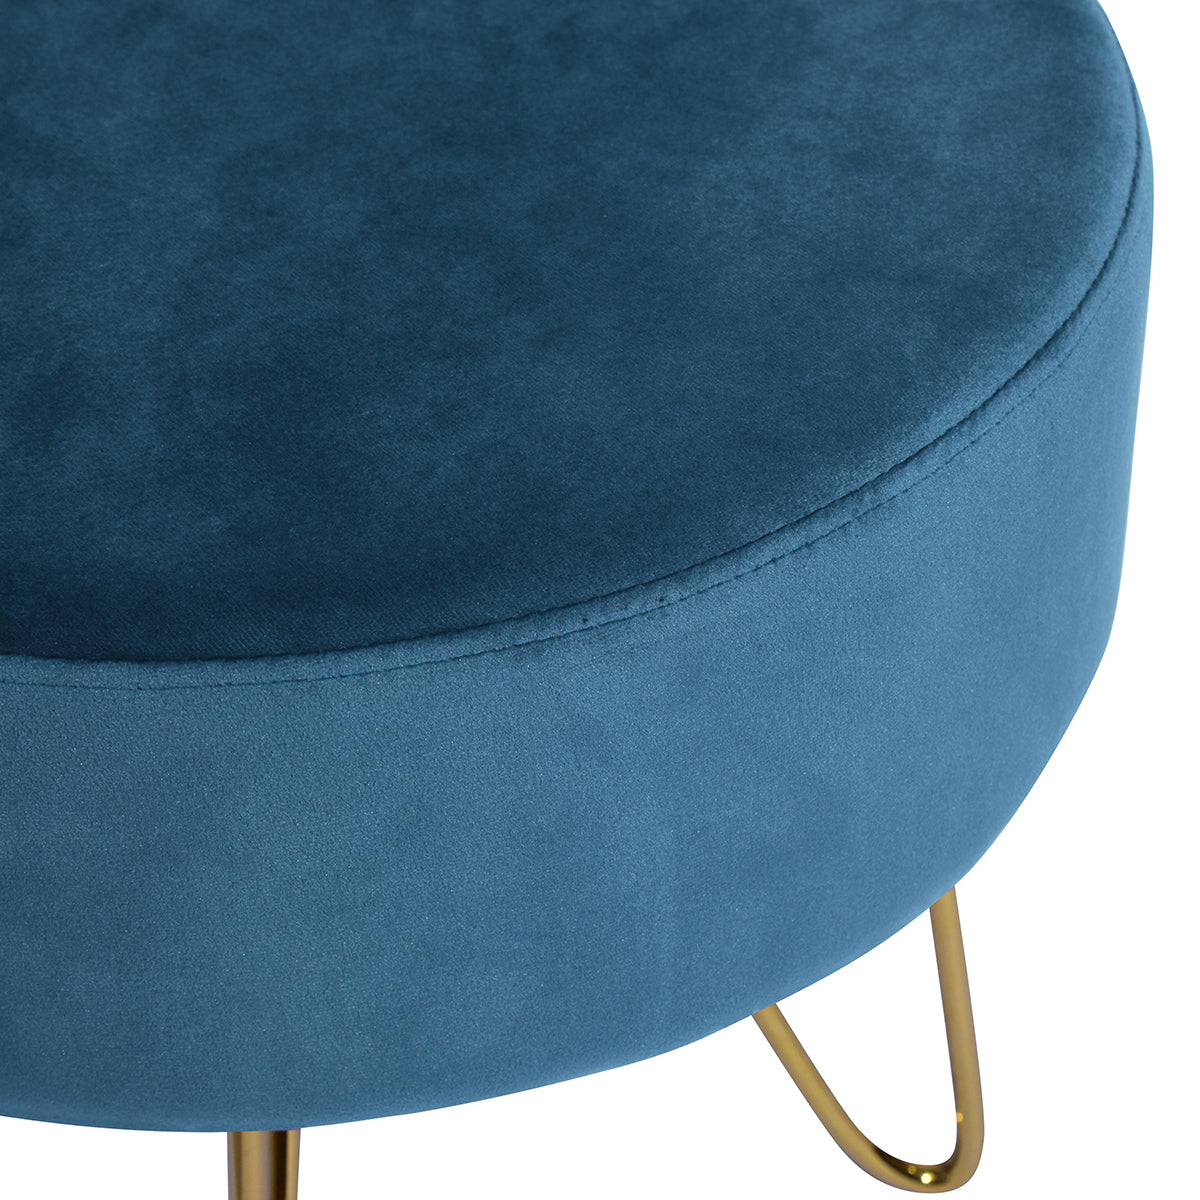 17.7" Round Shaped Ottoman with Metal Legs (Teal)